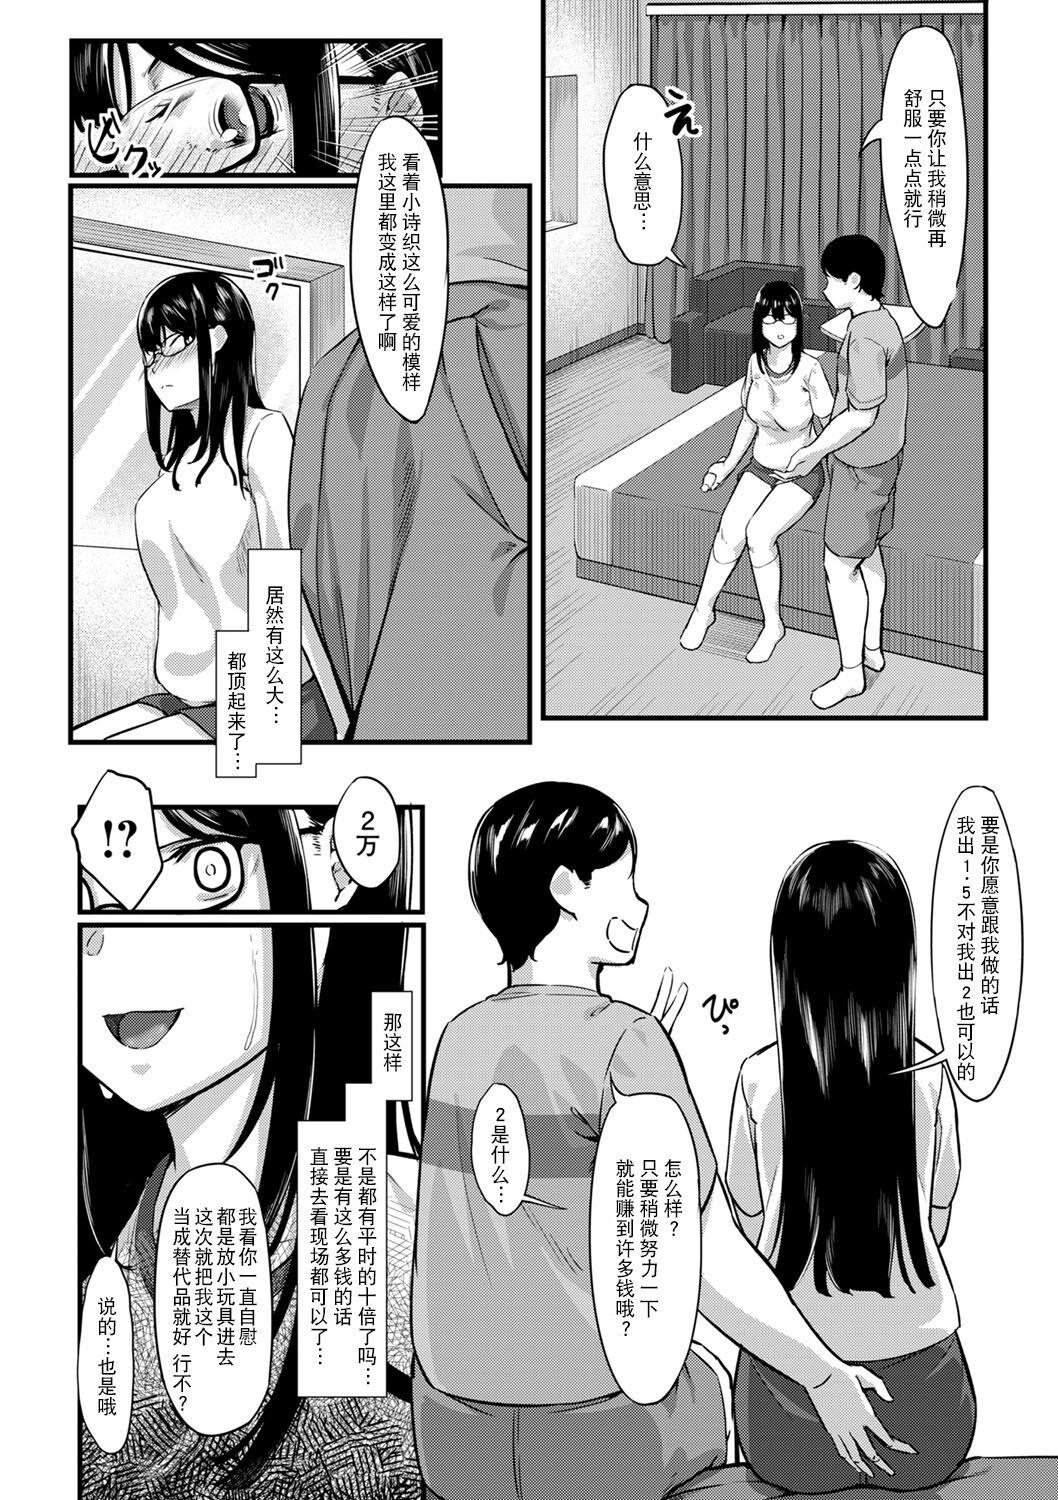 Lovers 沼に嵌まれば堕ちるだけ Pussylick - Page 7